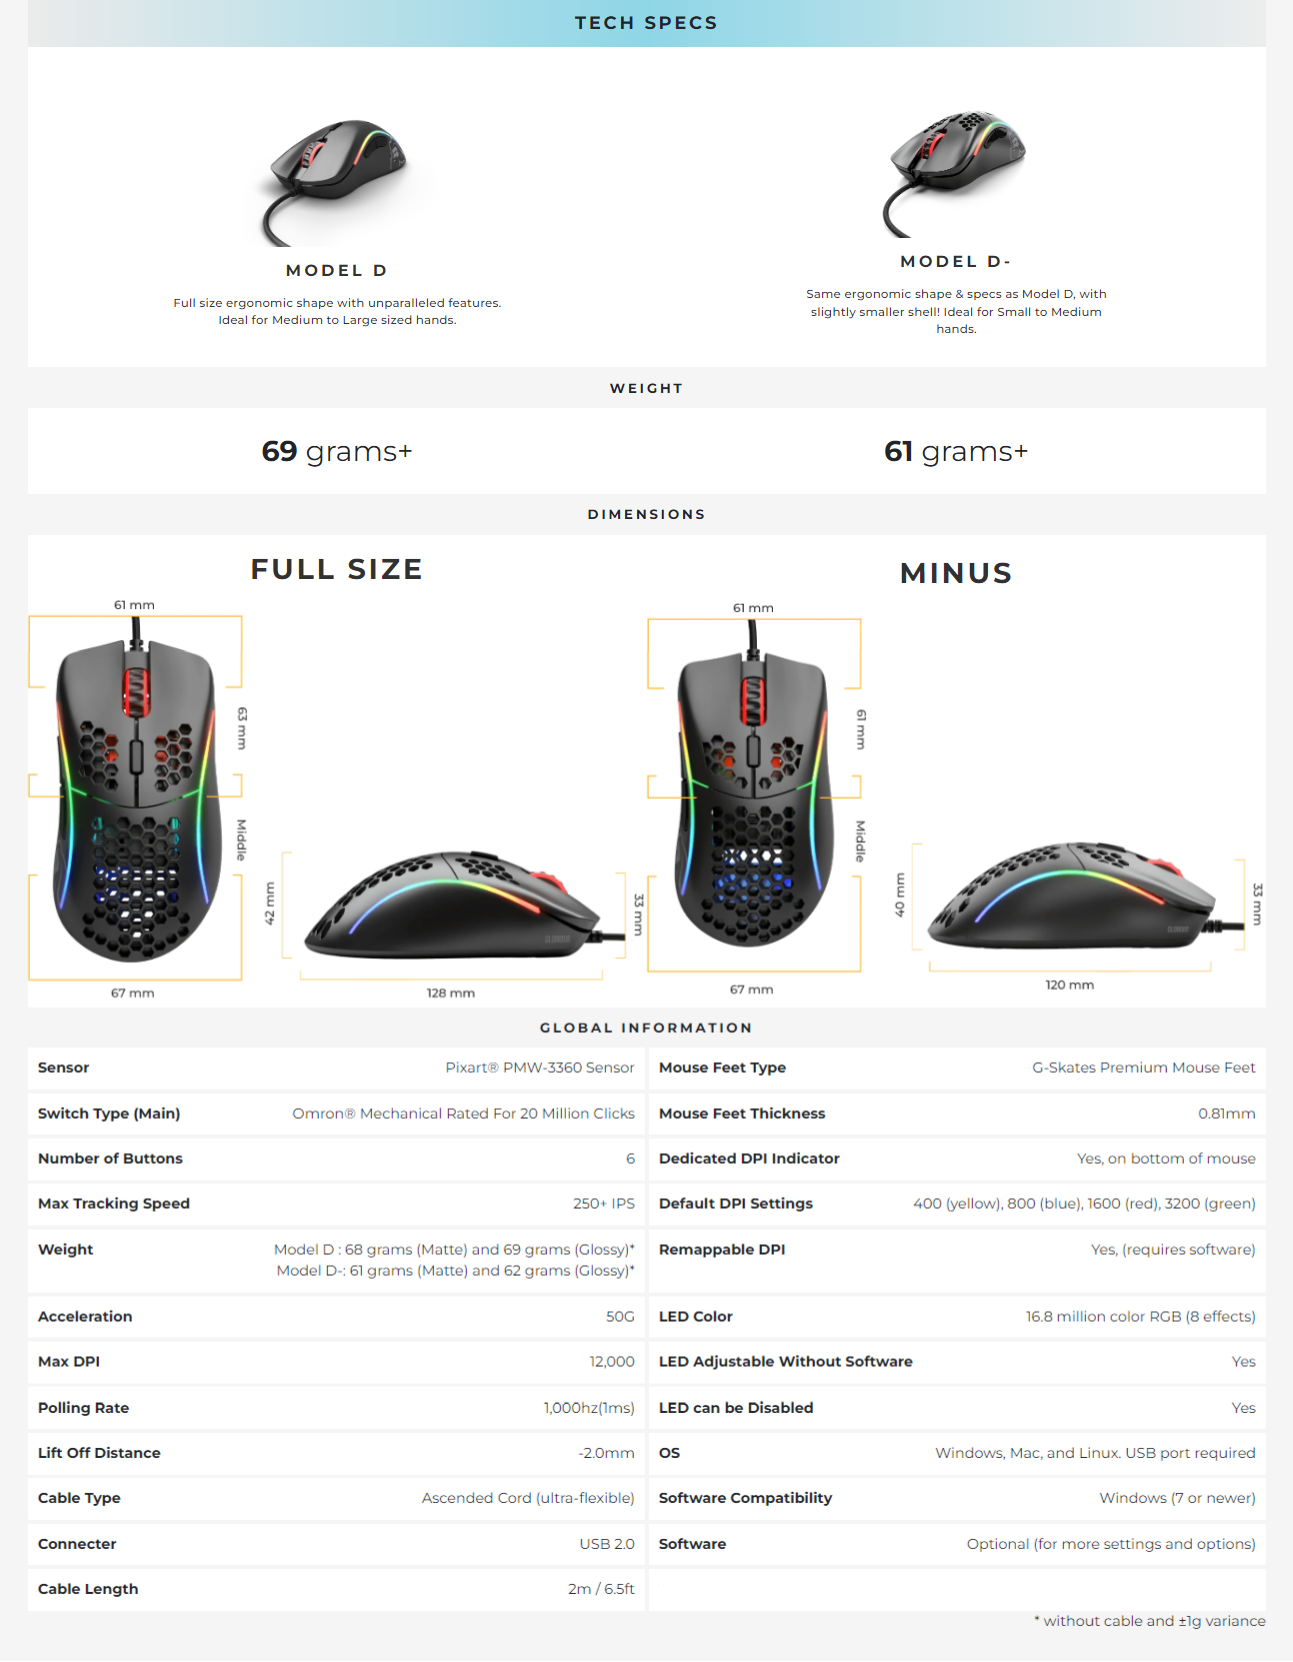 A large marketing image providing additional information about the product Glorious Model D Minus Wired Gaming Mouse - Glossy Black - Additional alt info not provided